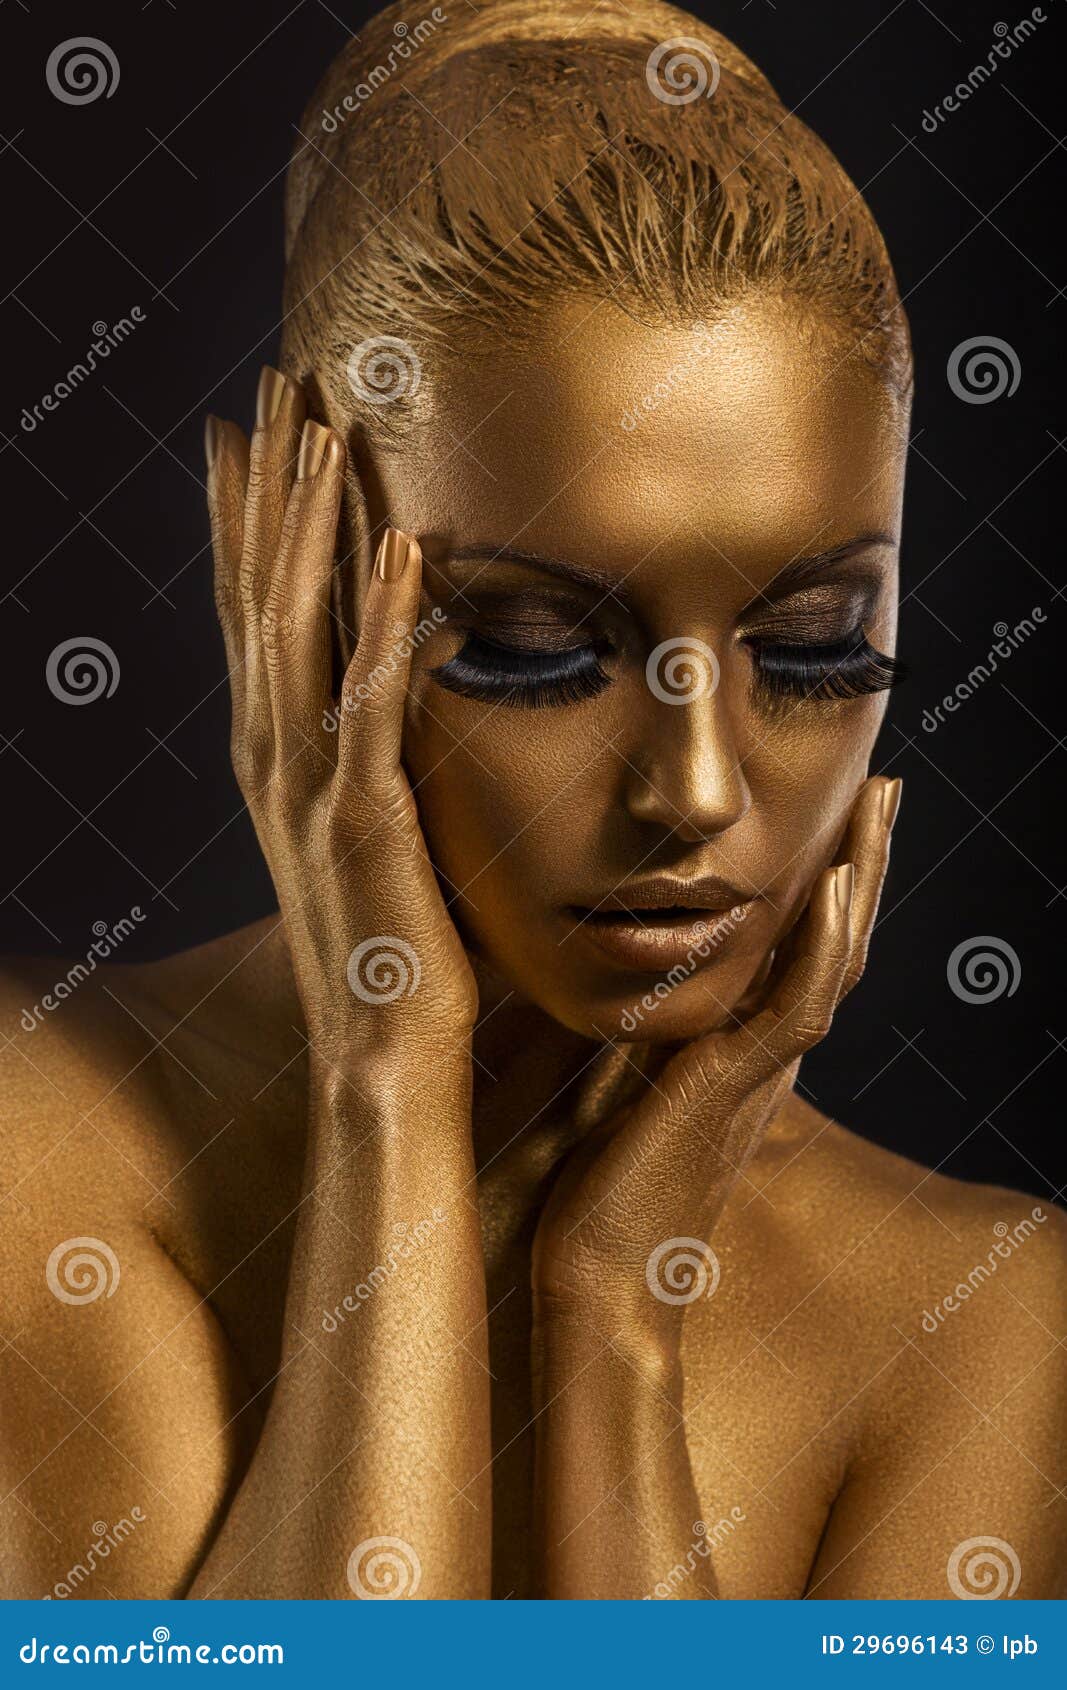 face art. fantastic gold make up. stylized colored woman's body